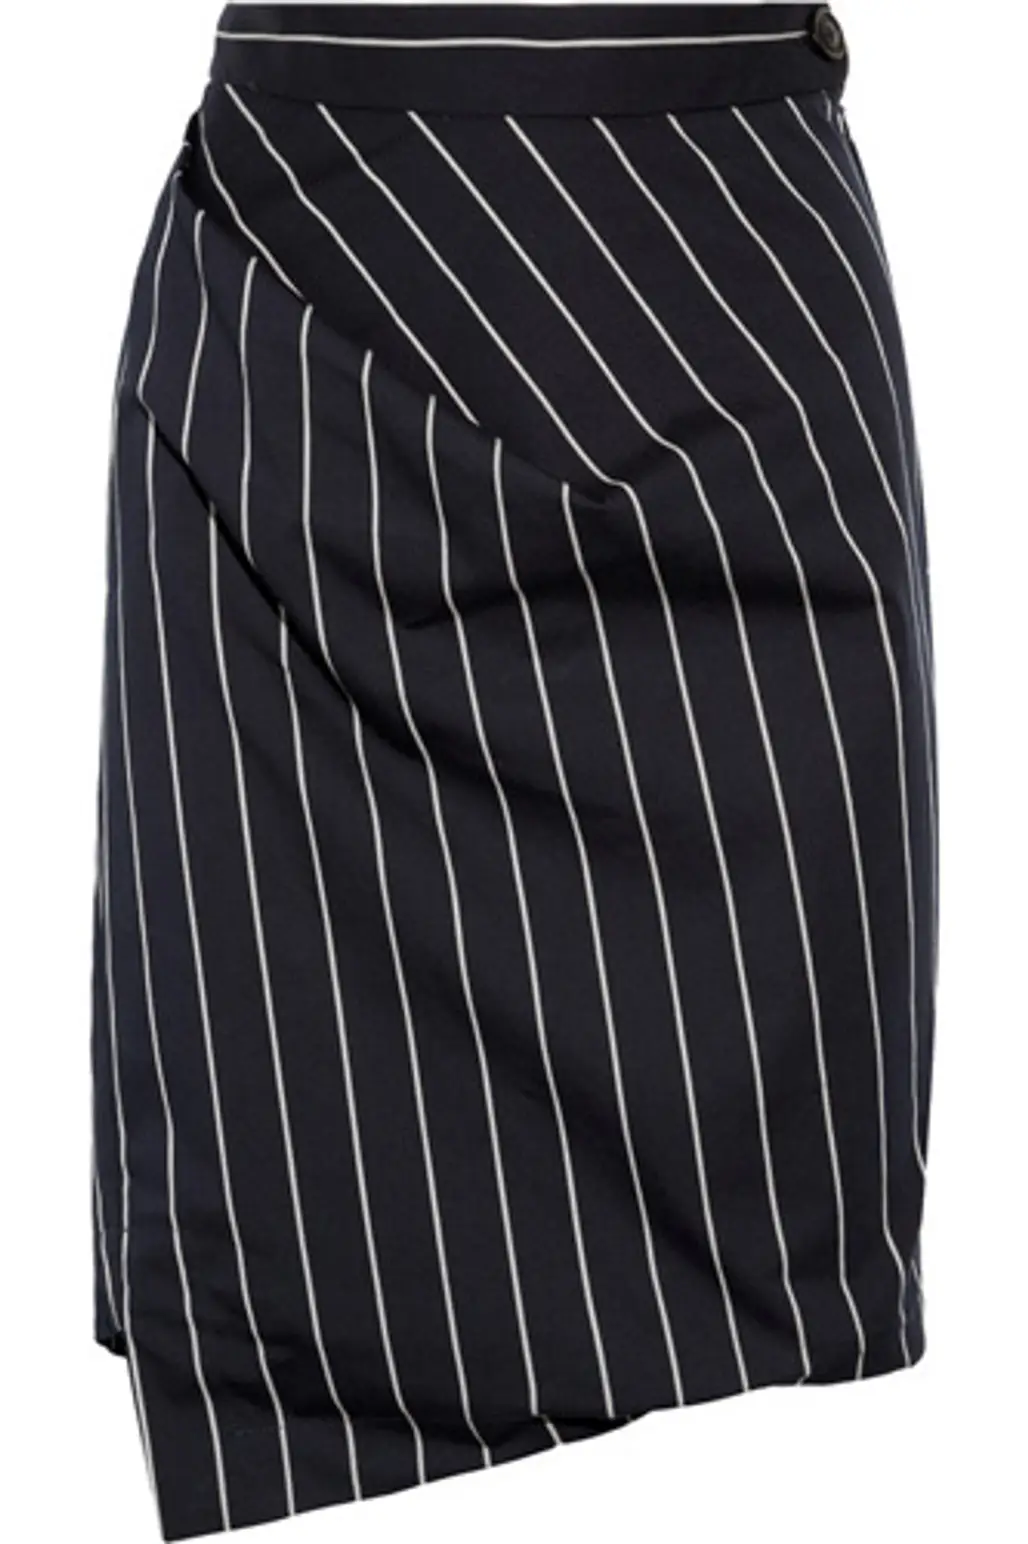 Vivienne Westwood Anglomania Striped Skirt